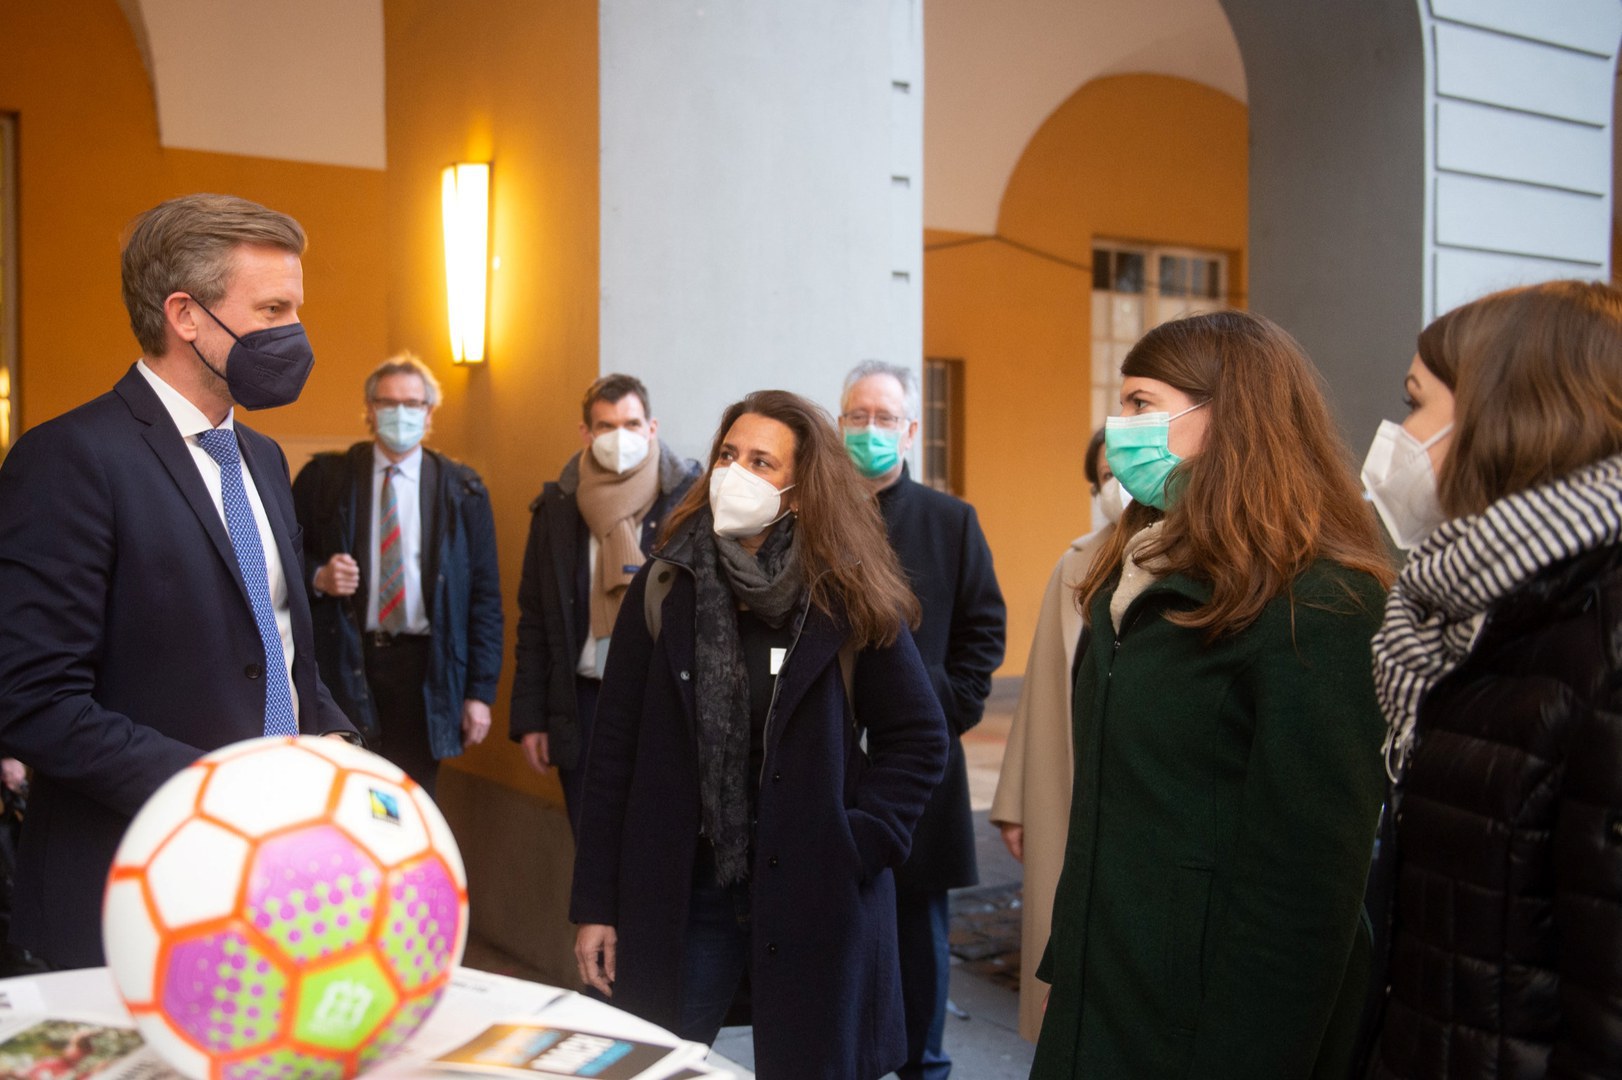 State Secretary Dr. Dirk Günnewig talking with Prof. Dr. Annette Scheersoi, Vice Rector for Sustainability, and representatives of the Fairtrade University Bonn student initiative.